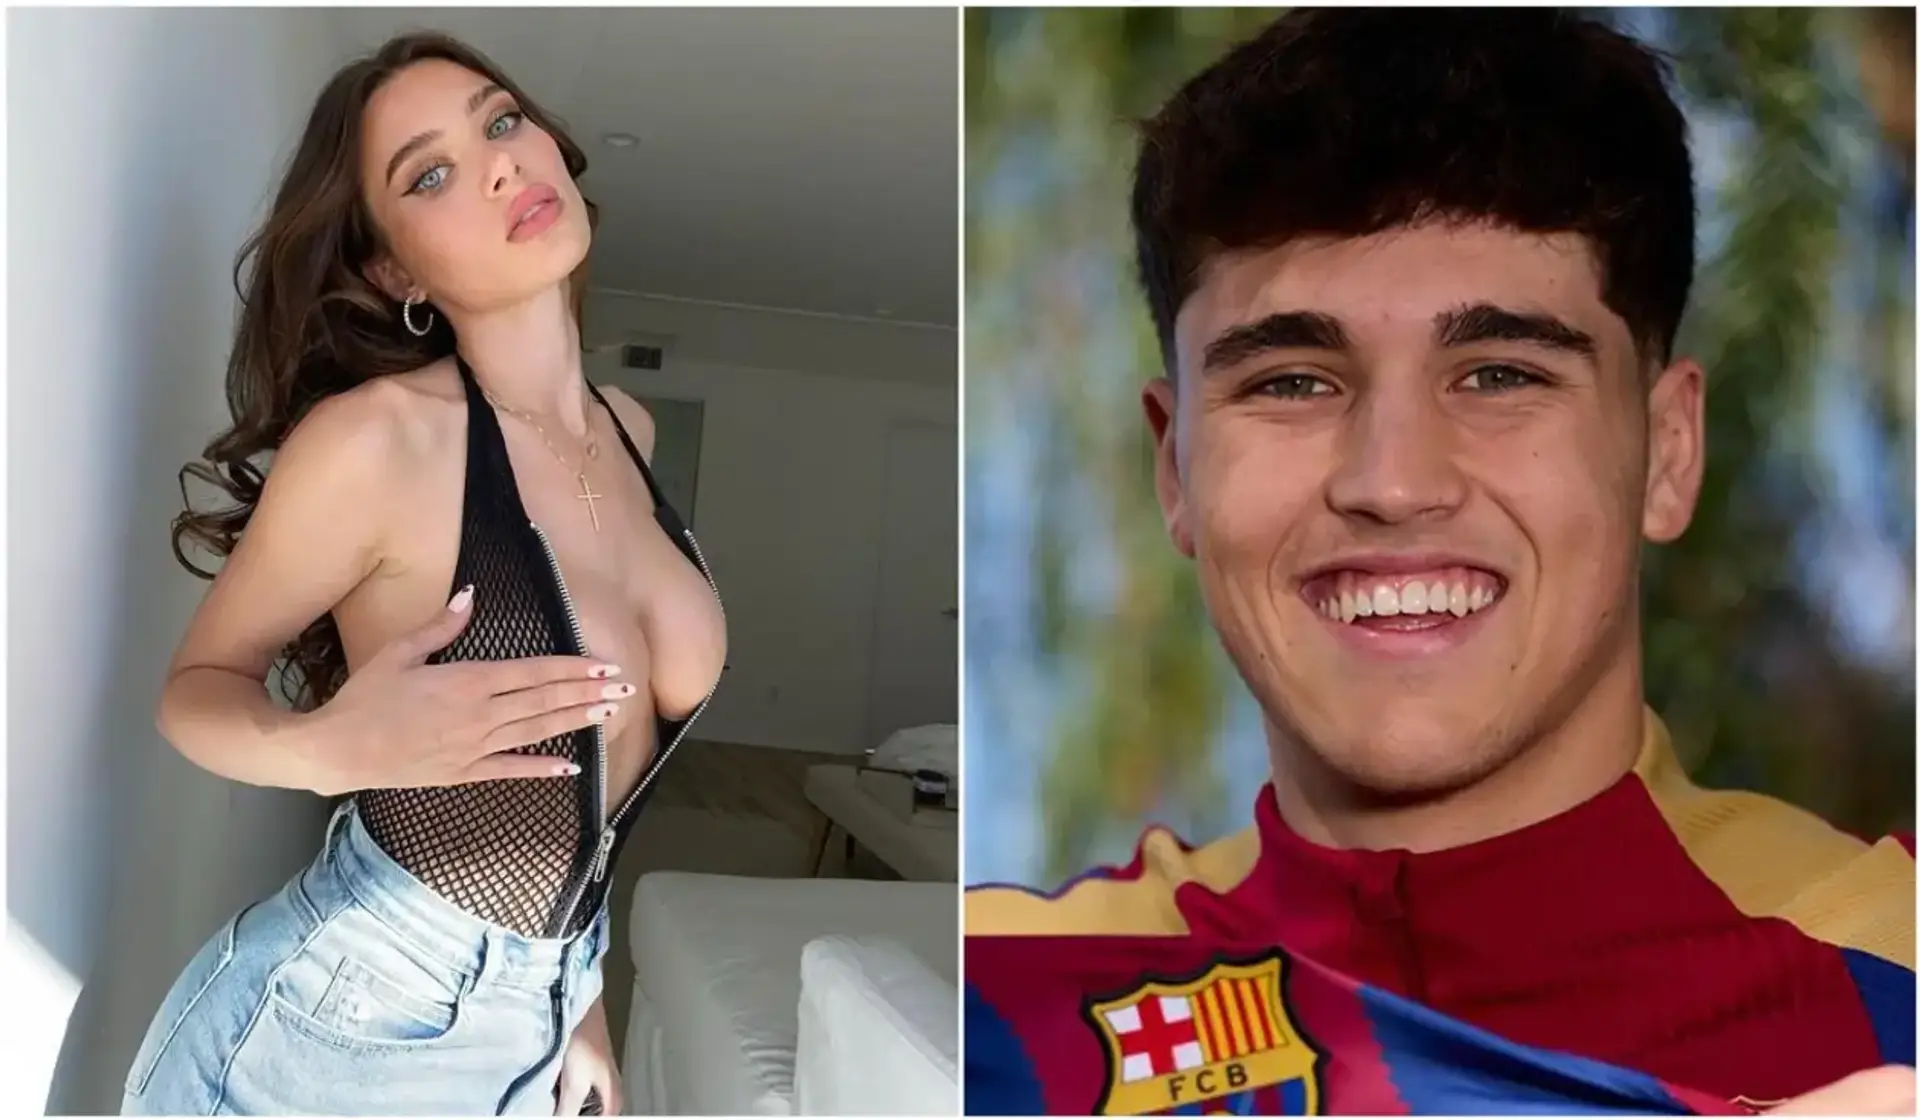 Barca star Pau Cubarsi caught liking all of porn star Lana Rhoades' posts on Instagram. Once people noticed, he deleted them